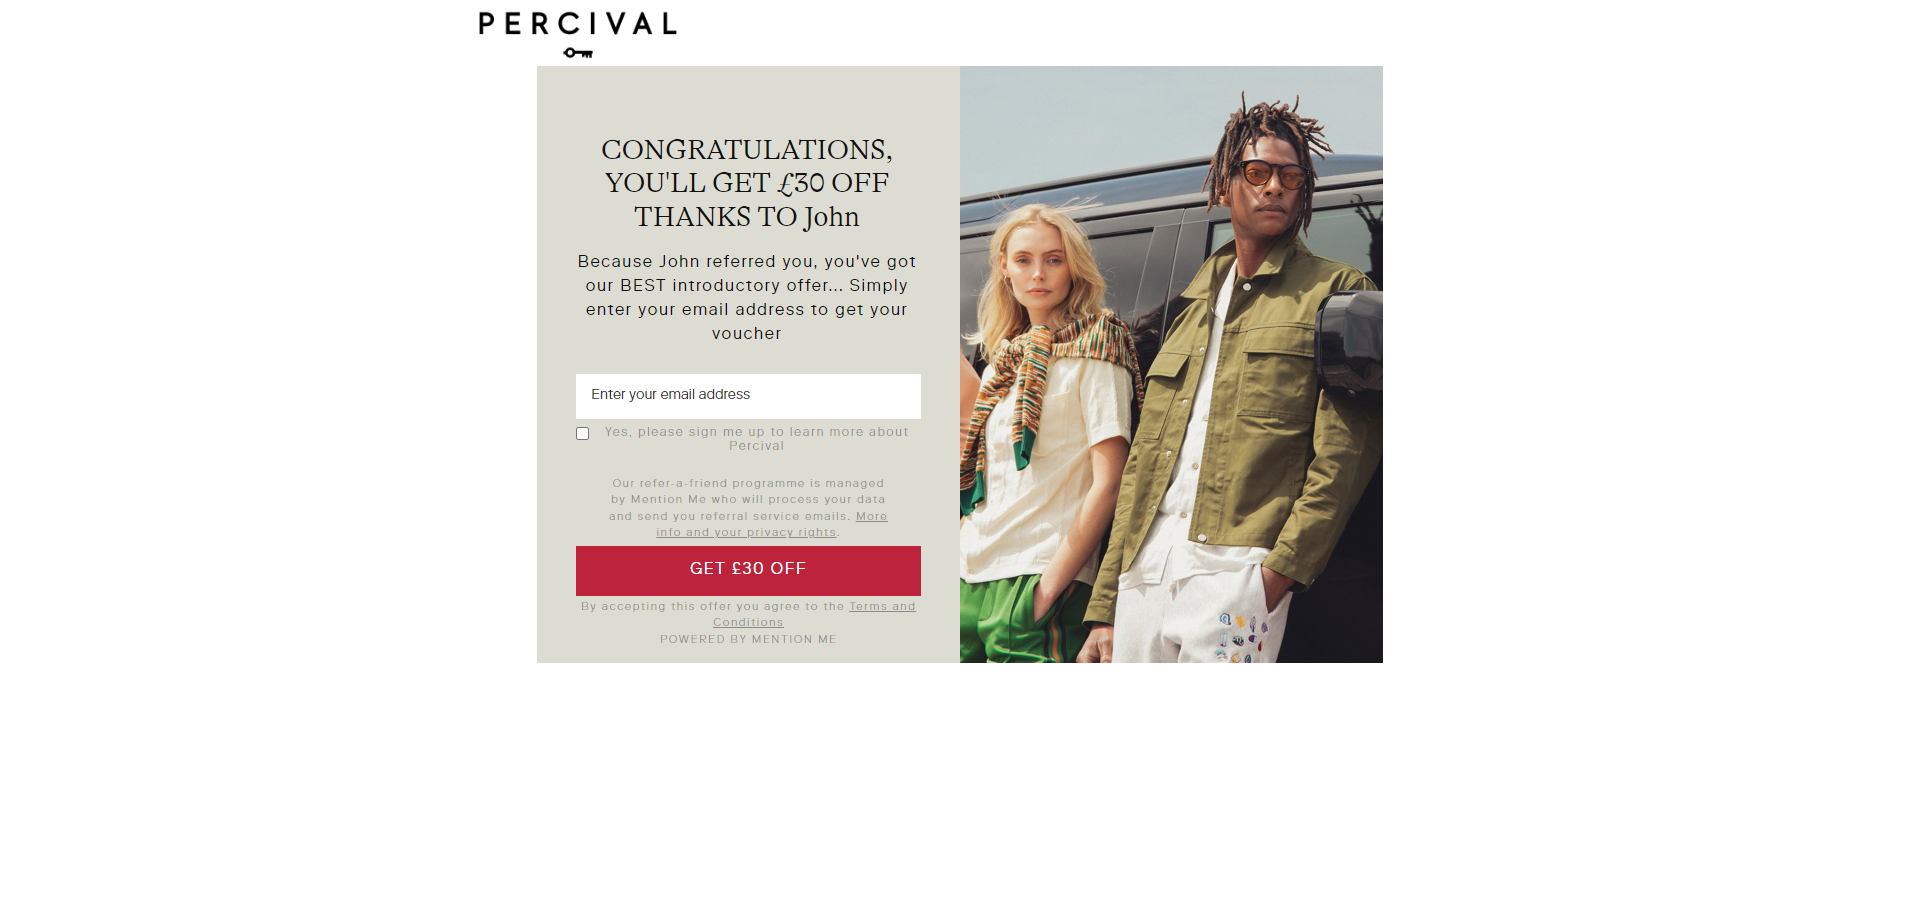 Referral Landing Page for Percivalclo